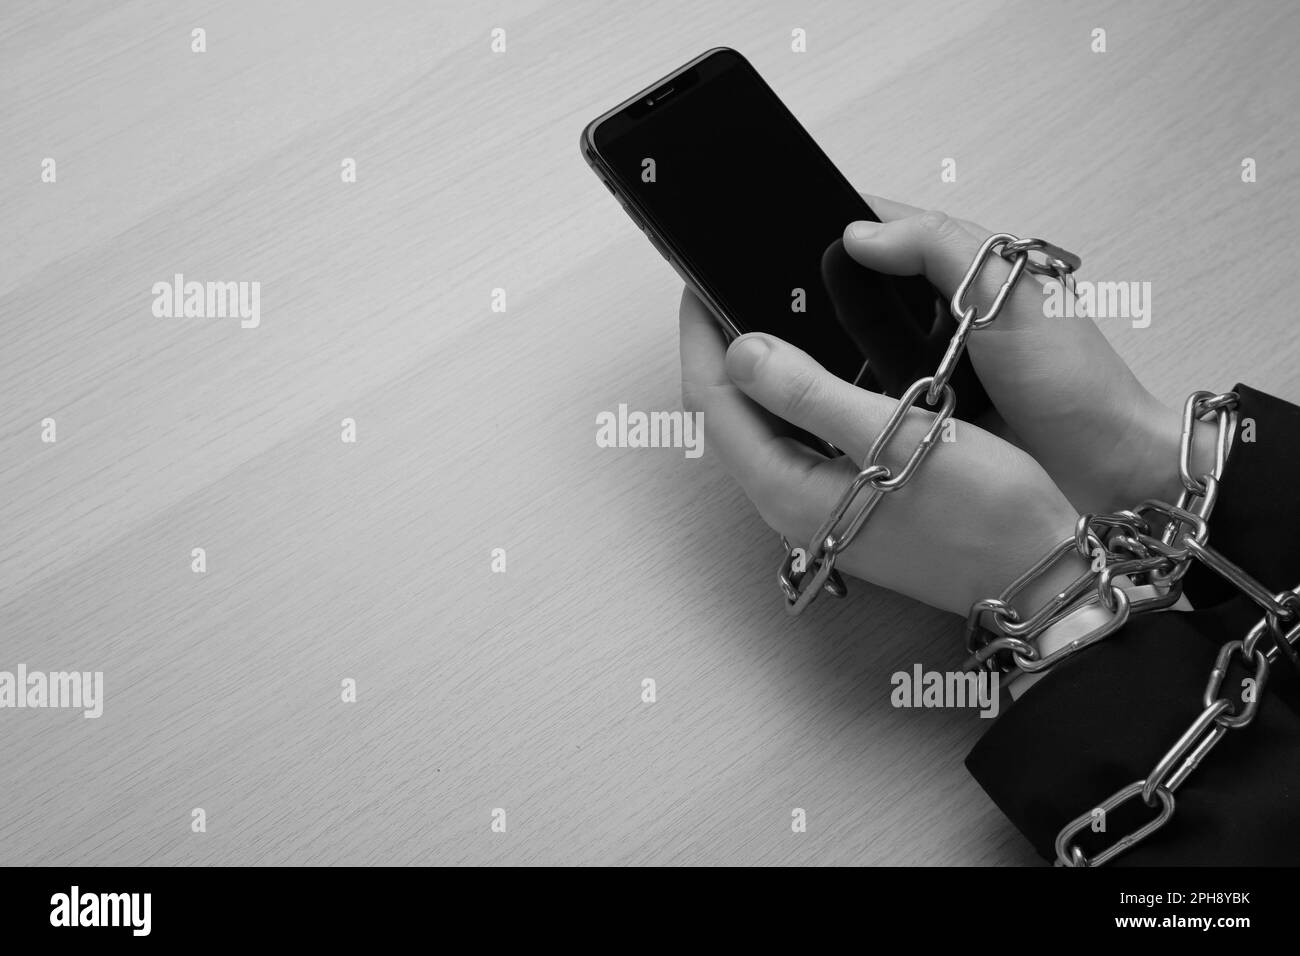 Above view of internet addicted woman with chained hands using smartphone at wooden table, space for text. Black and white effect Stock Photo